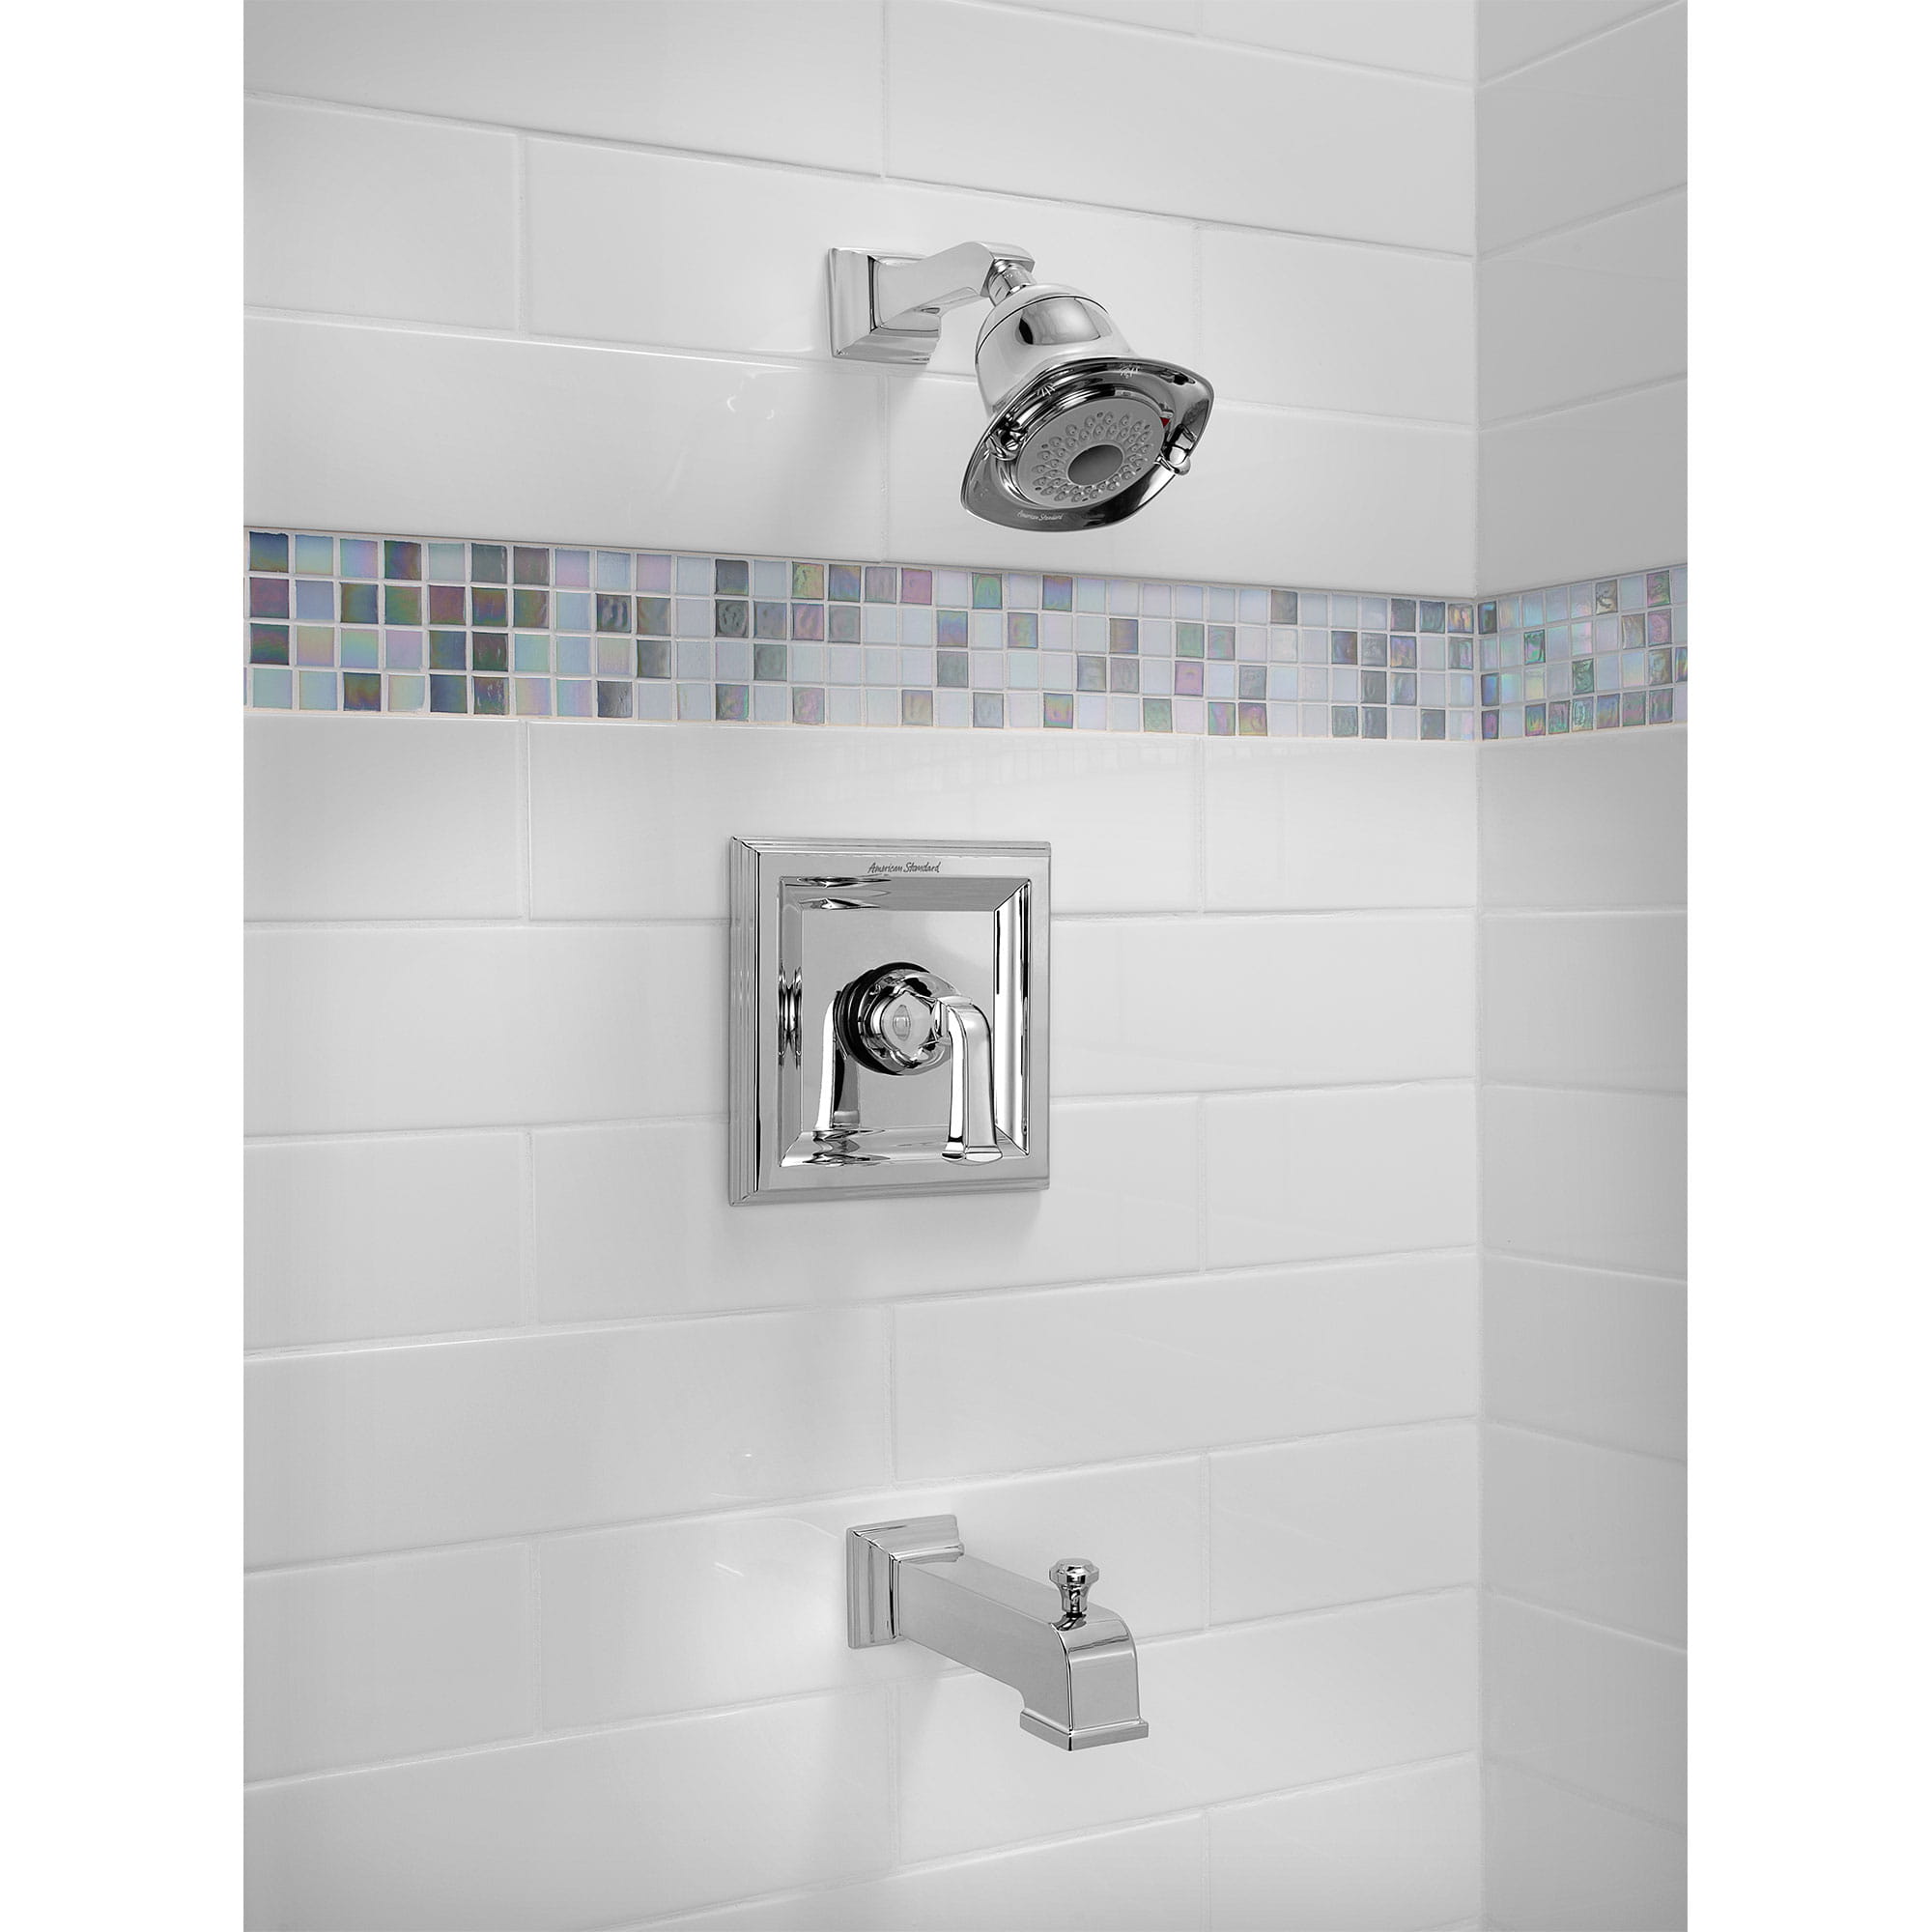 Town Square 20 GPM Tub and Shower Trim Kit with FloWise Showerhead and Lever Handle CHROME